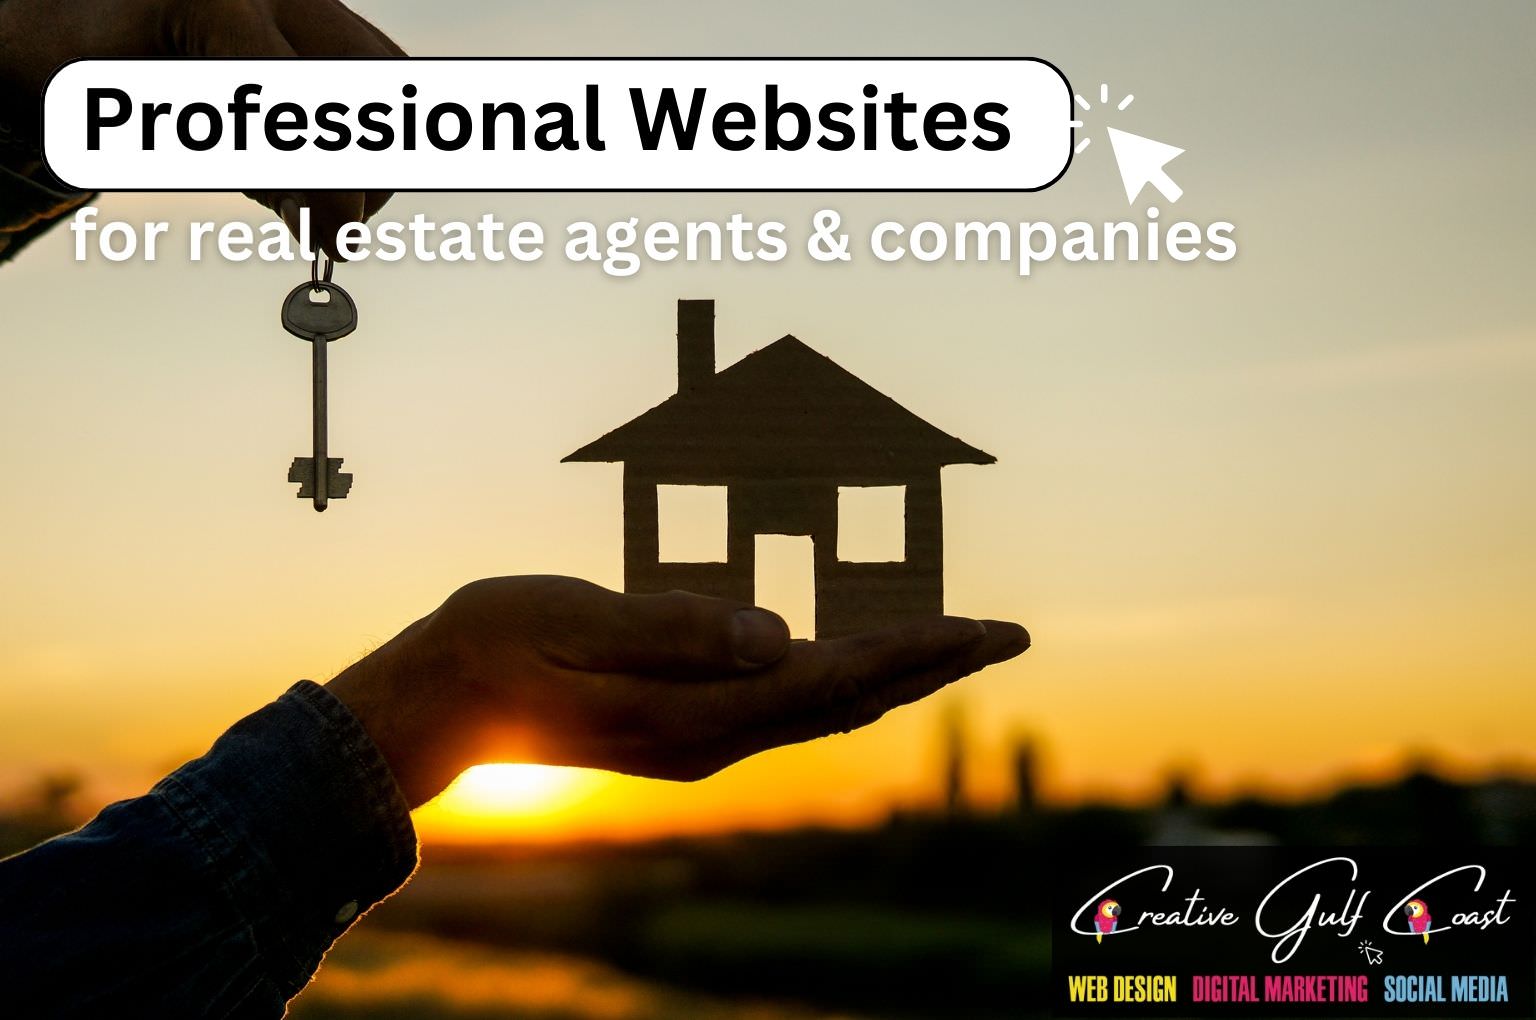 Website Designer for local real estate agents and companies in Tampa Florida and beyond. Professional Marketing Agency Creative Gulf Coast